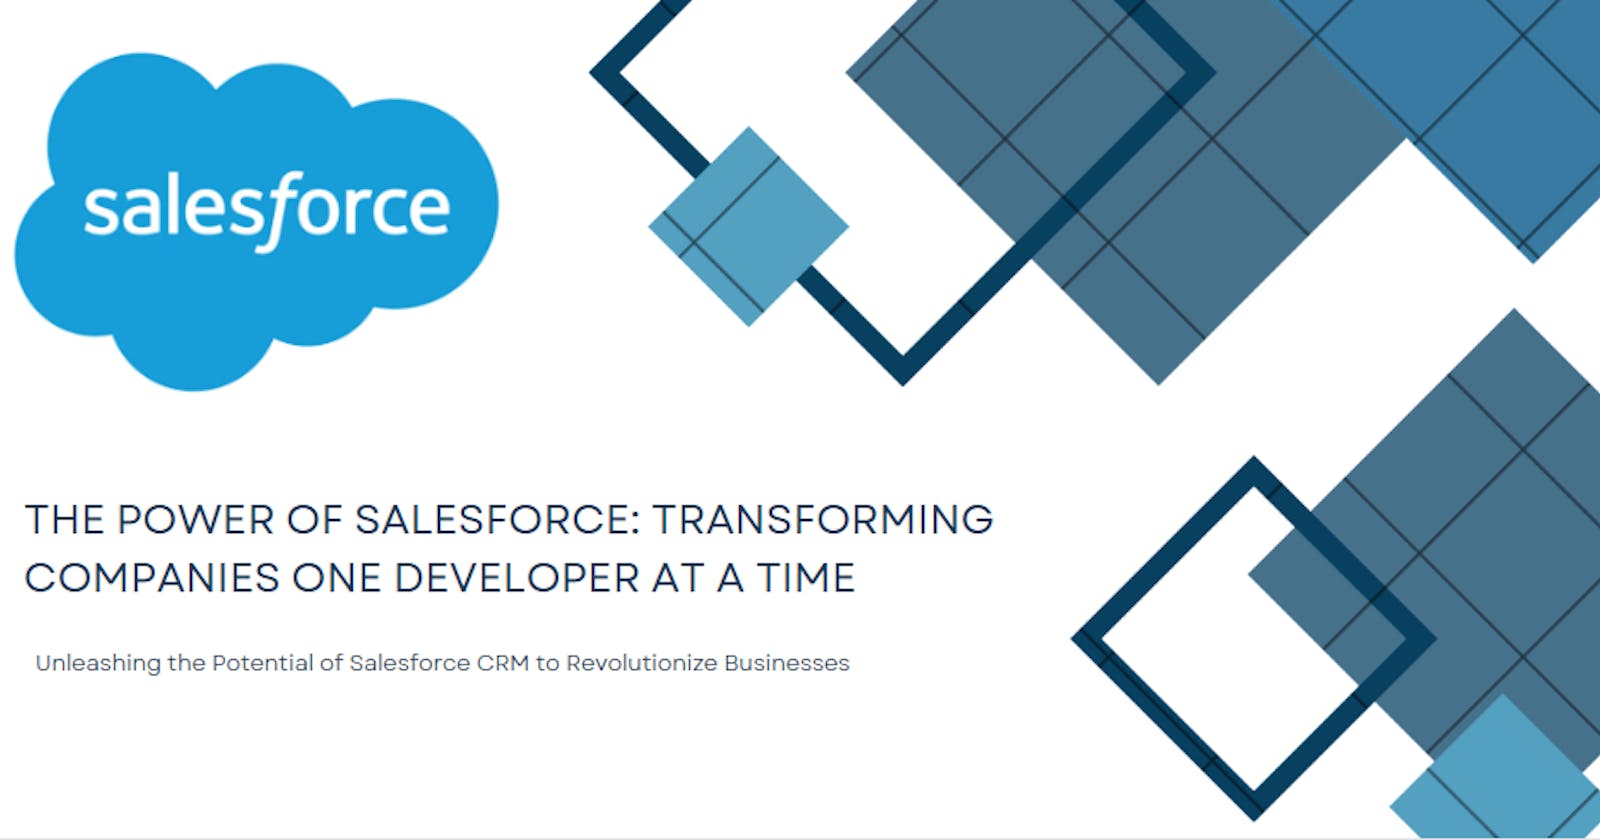 The Power of Salesforce: Transforming Companies One Developer at a Time